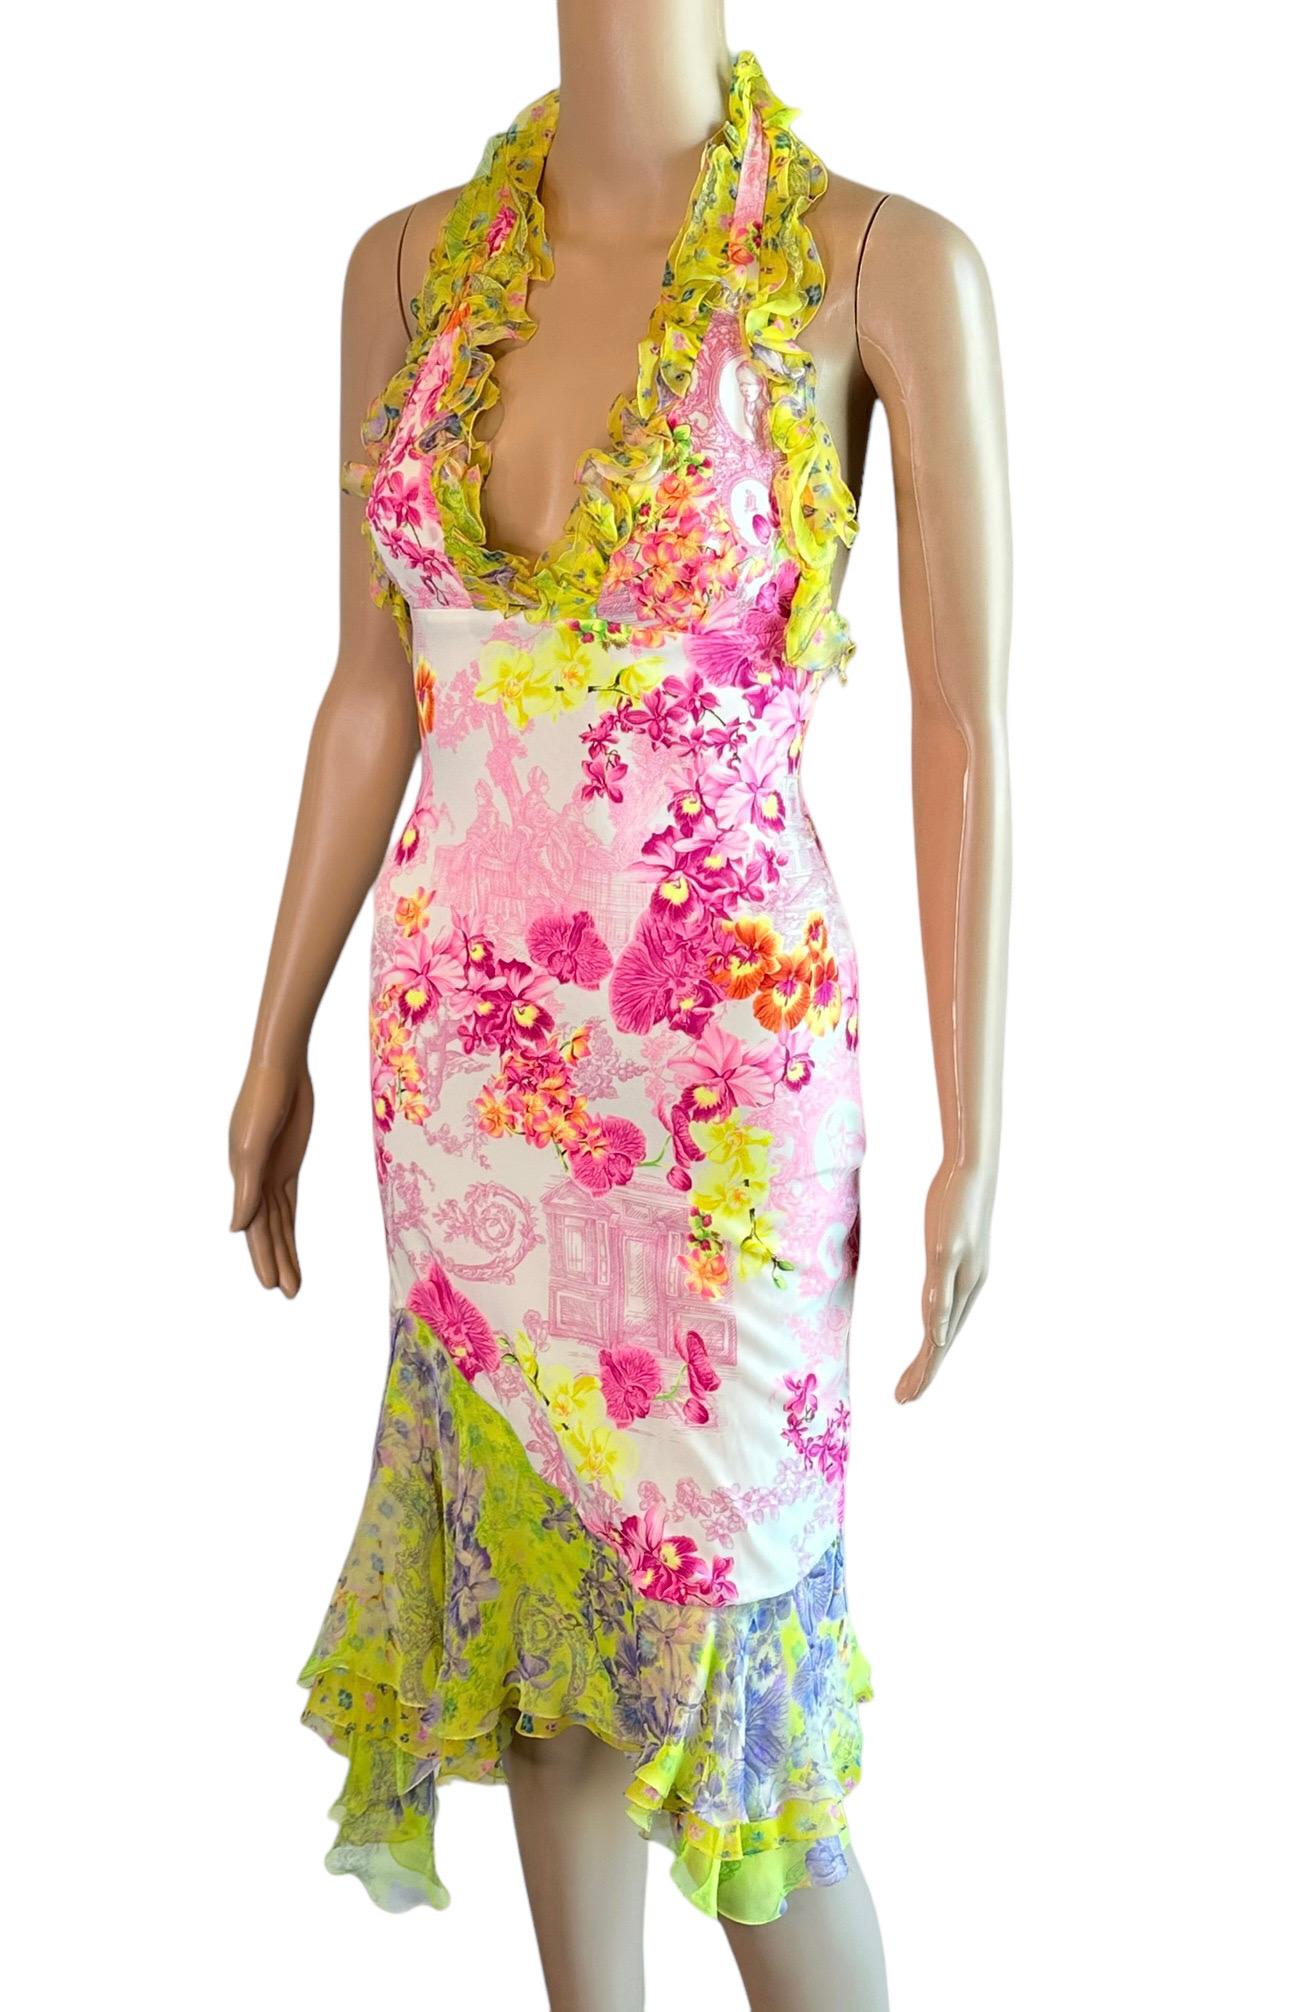 Versace S/S 2004 Runway Floral Print Ruffle Plunging Neckline Low Back Dress 2